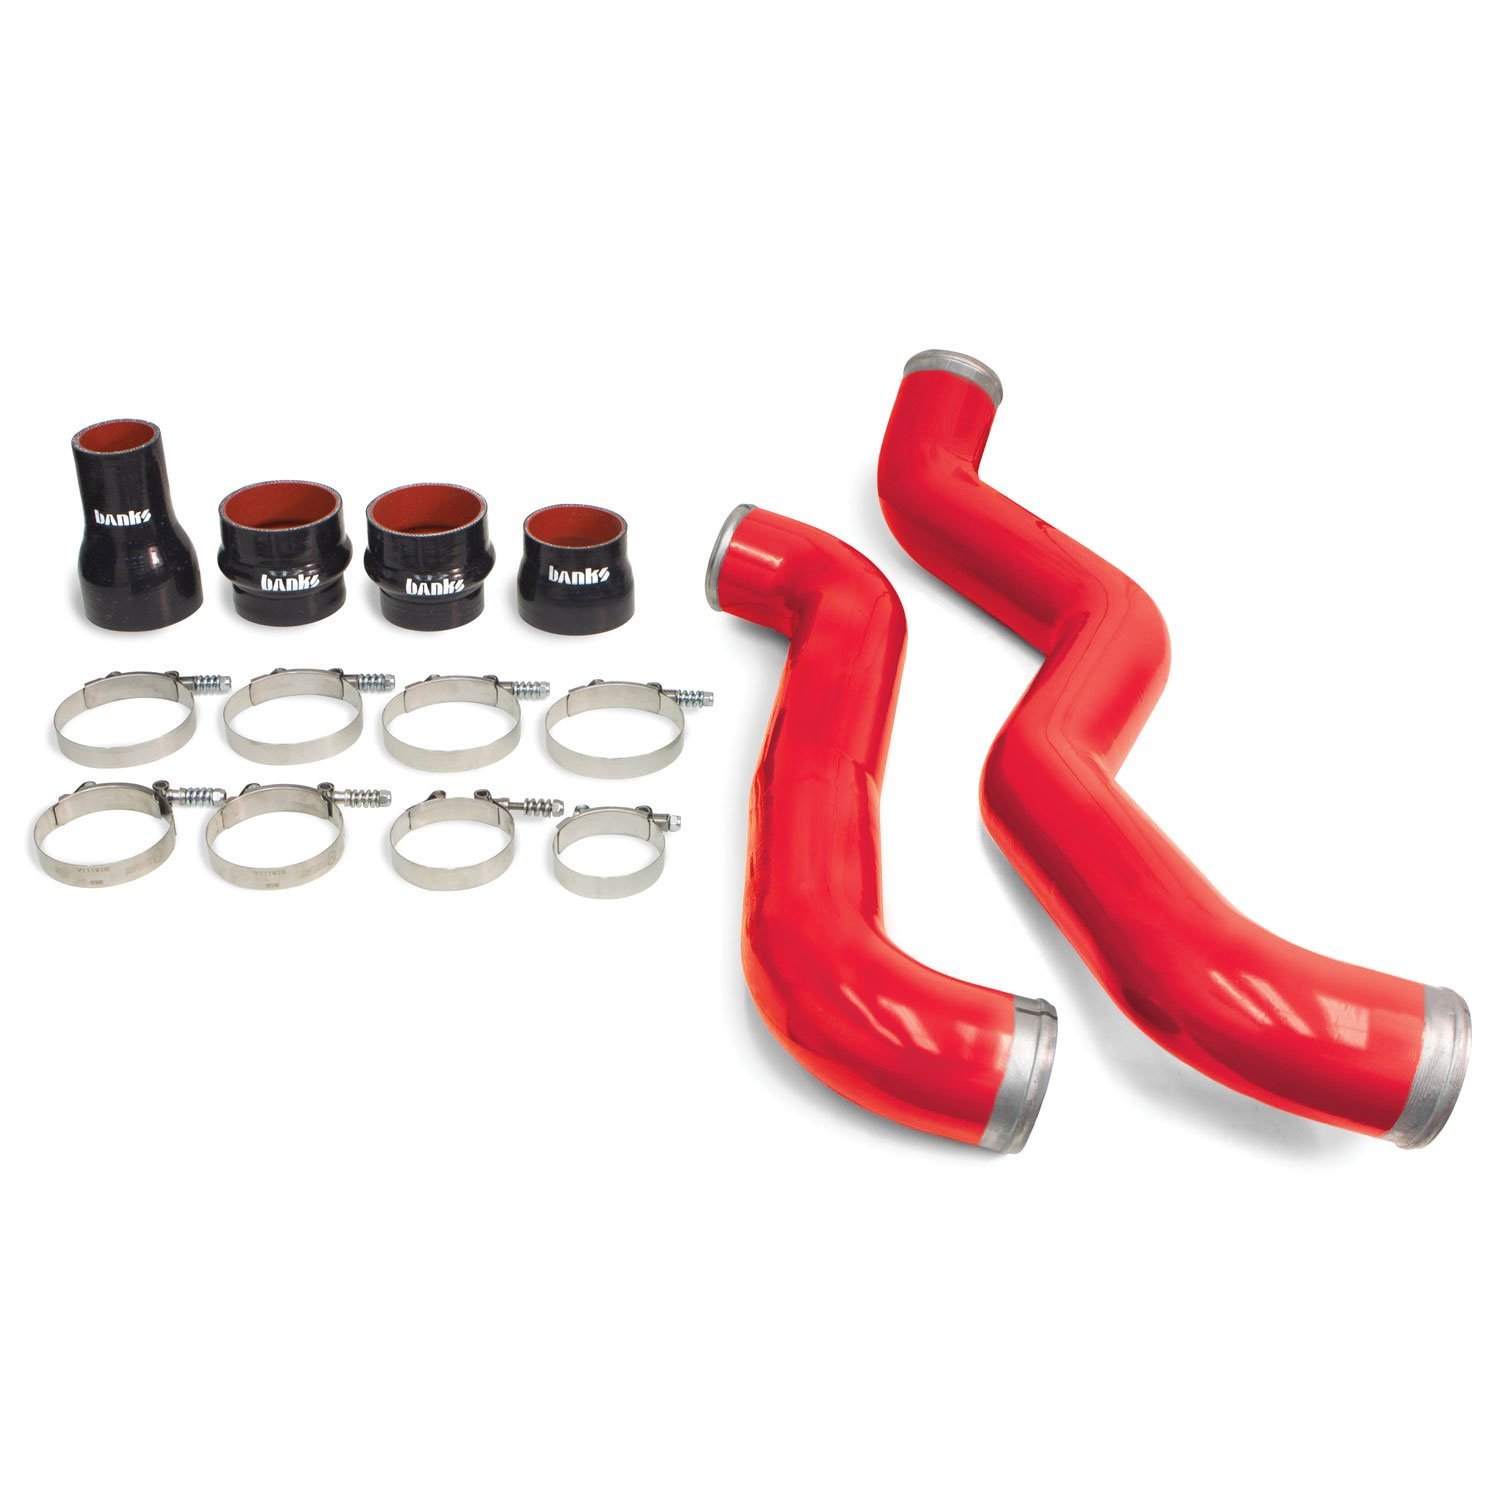 BOOST TUBE SYSTEM 2013-1